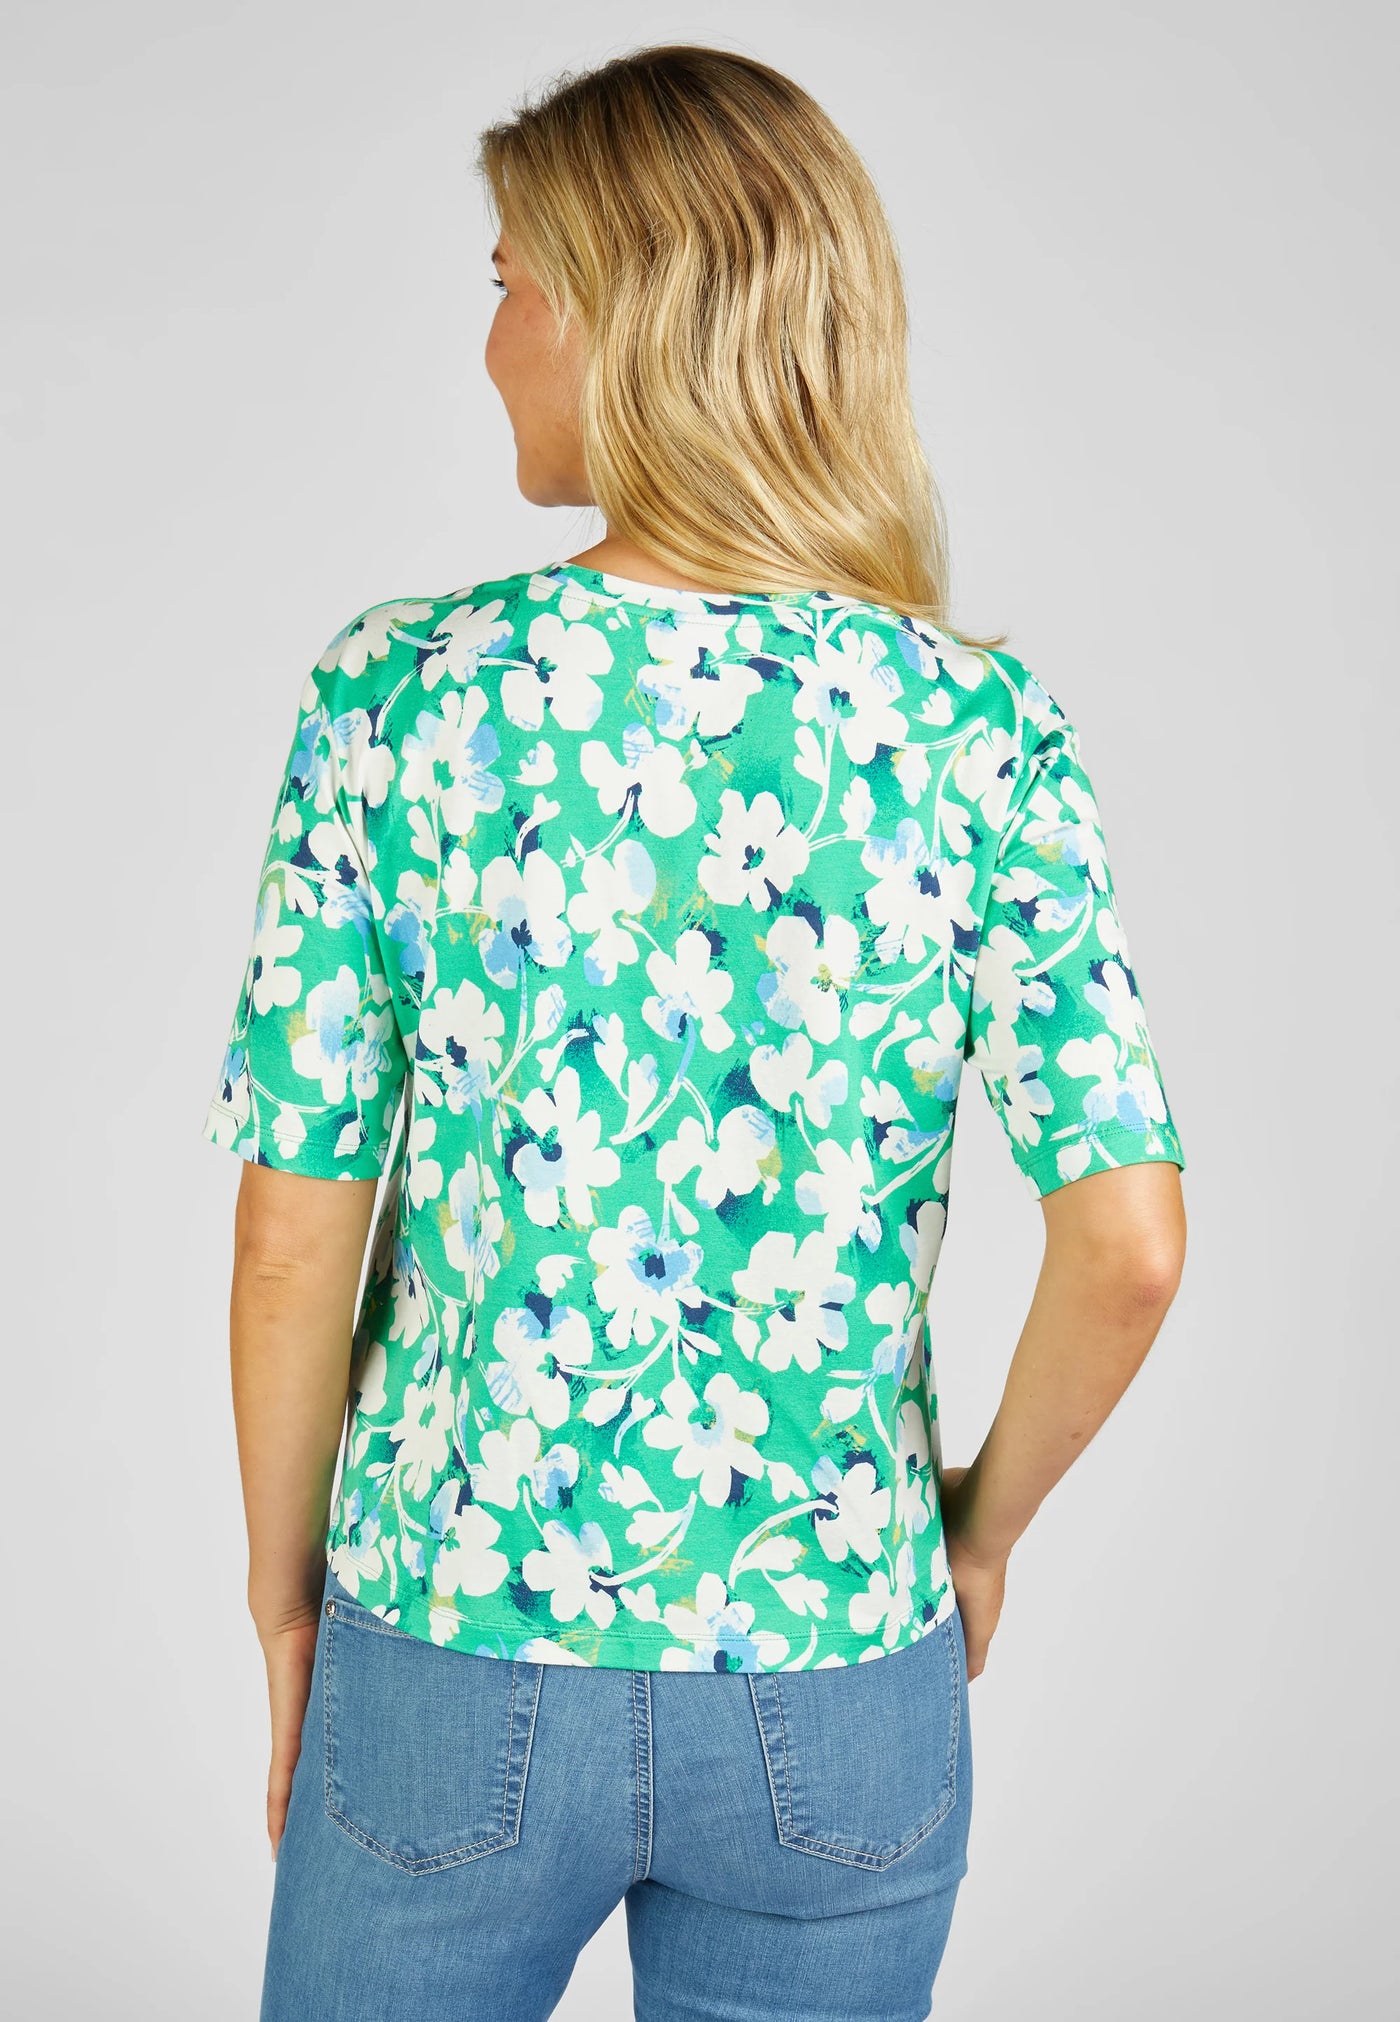 Blue and Green T-Shirt With Floral Print